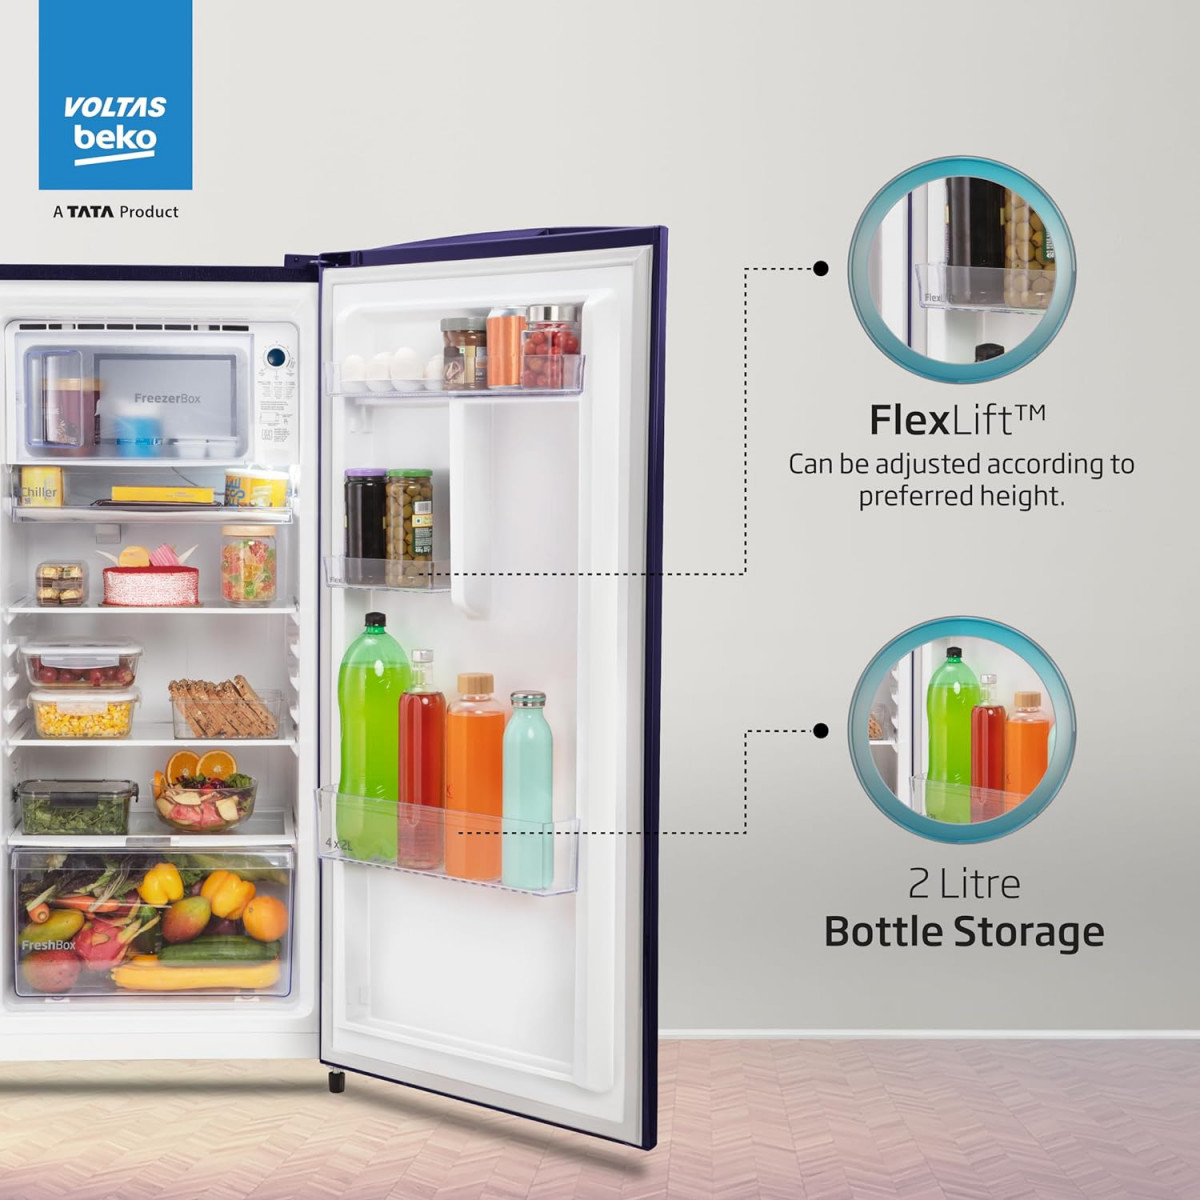 Voltas Beko A TATA Product 173 L 3 star Made-In-India Direct Cool Refrigerator RDC205C  S0PBE0M0000GO Peony Blue